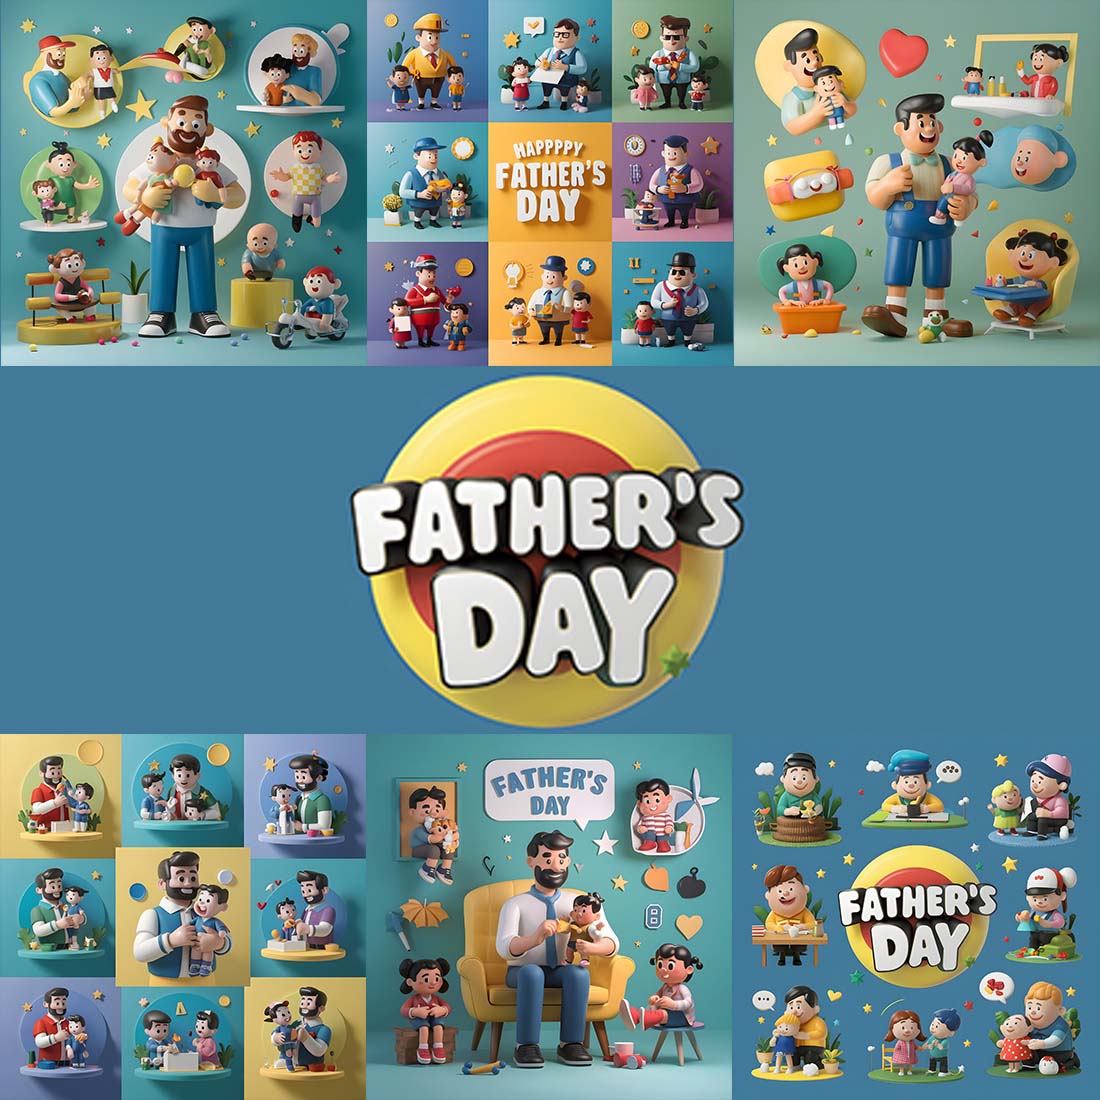 12 Father's Day-themed featuring various 3d cartoon cover image.